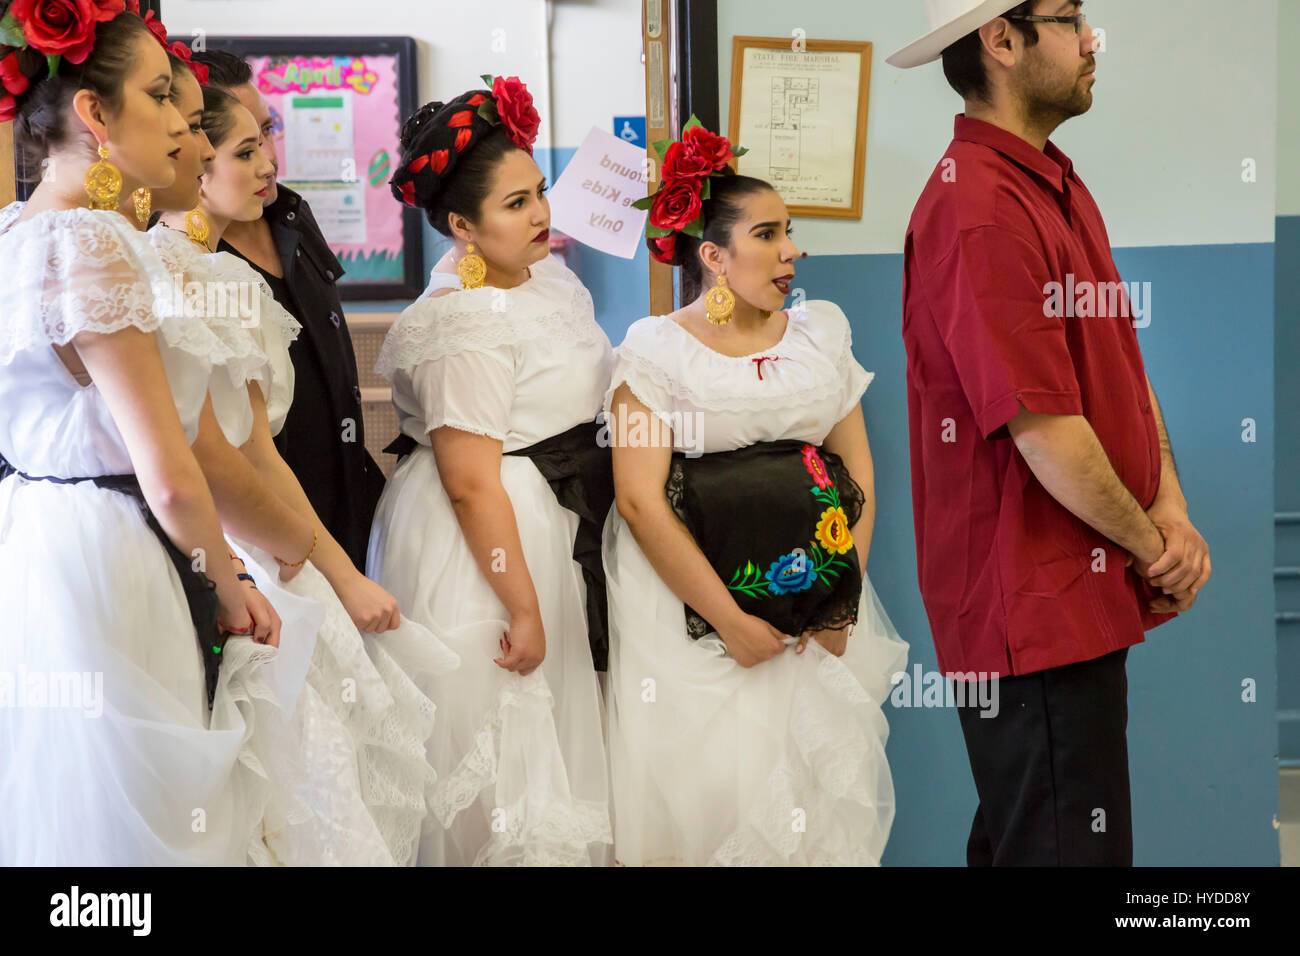 Detroit, Michigan - Members of the Ballet Folklorico Los Renacidos wait to perform at St. Gabriel's Catholic Church during a solidarity rally of Mexic Stock Photo